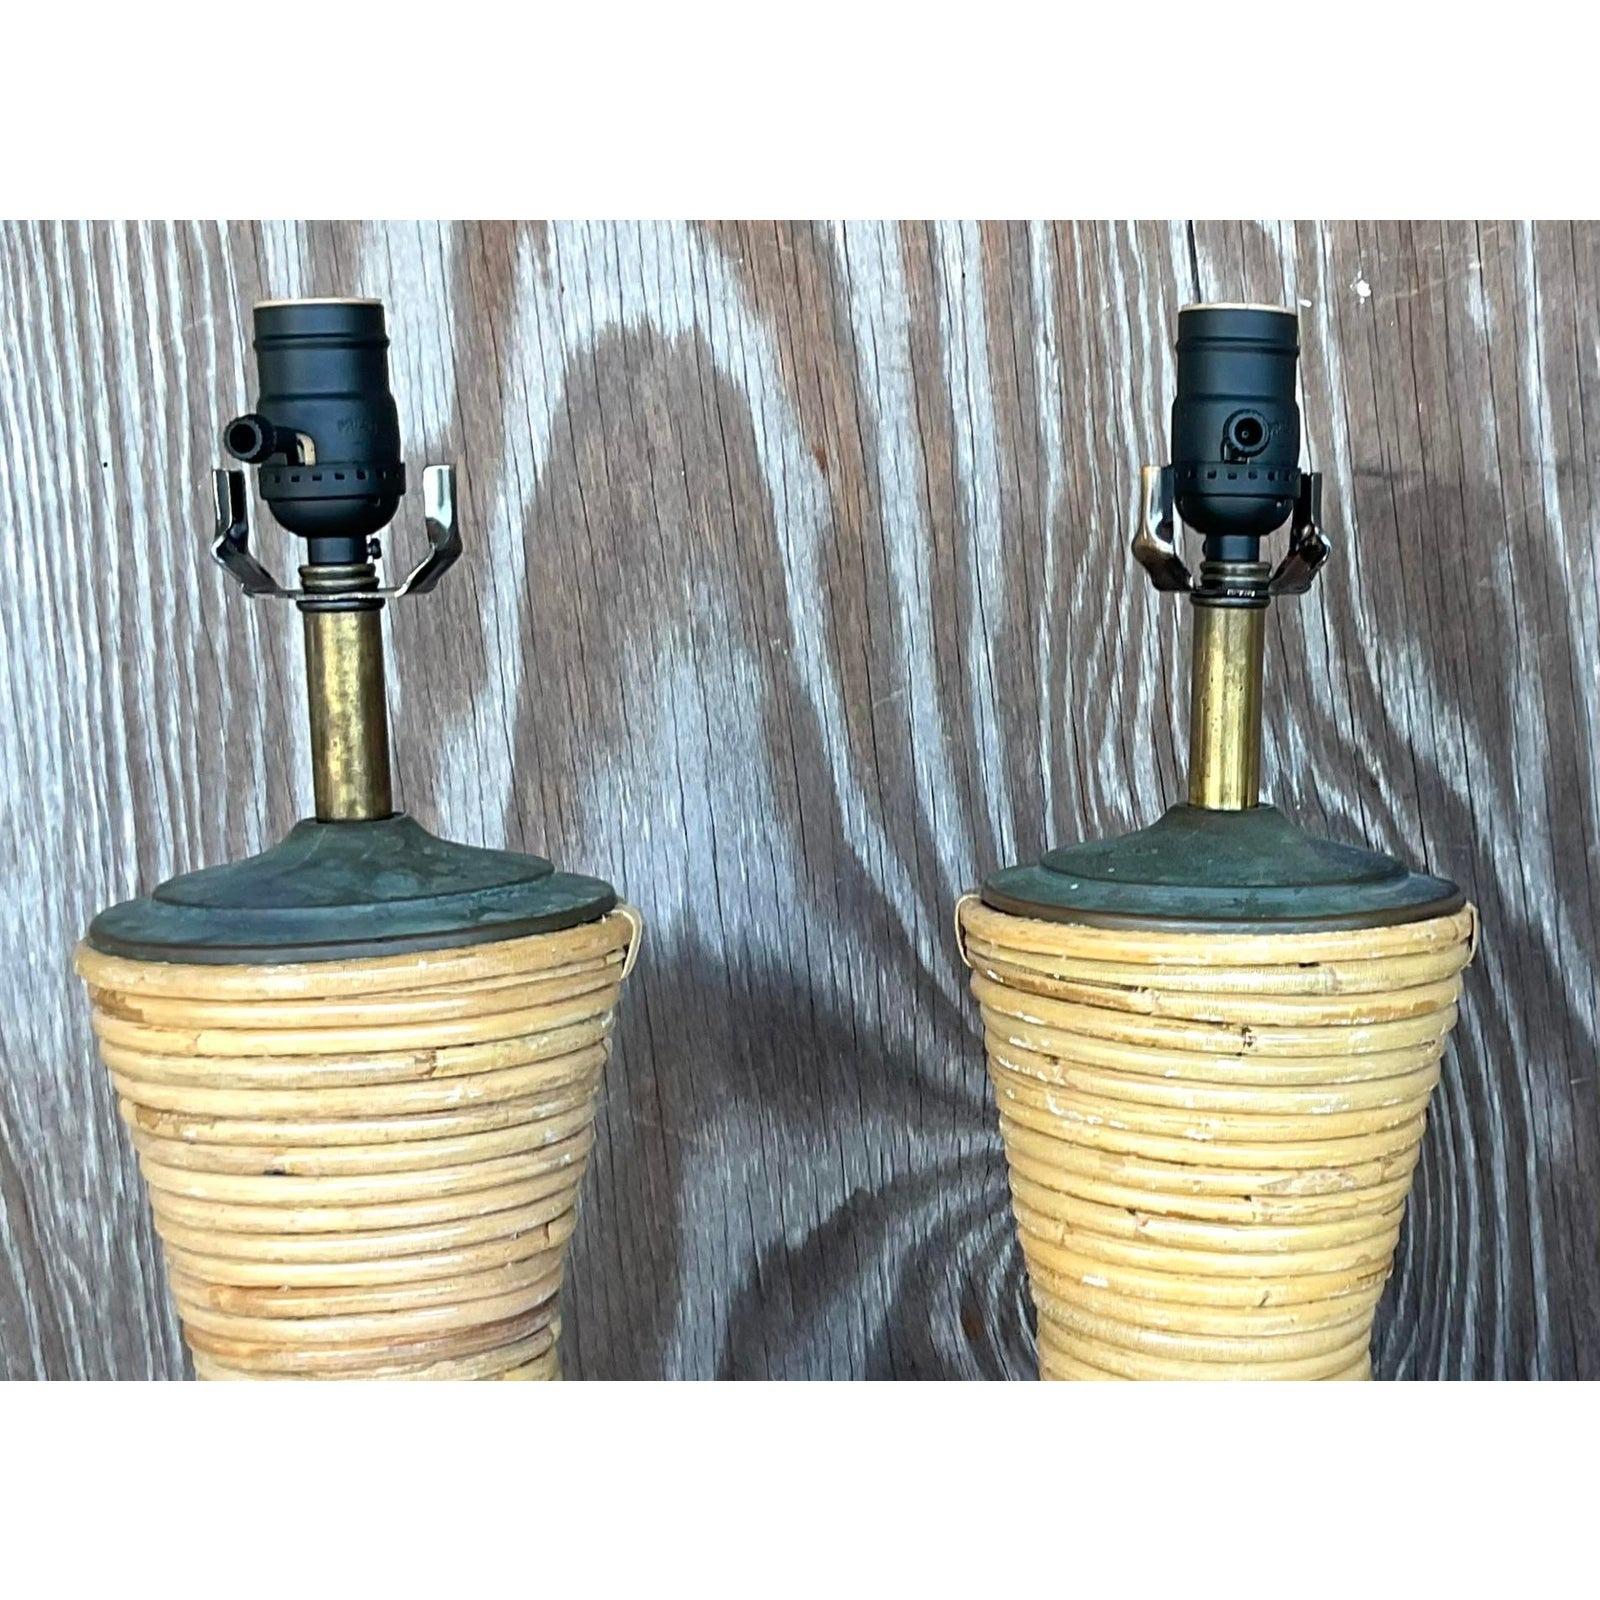 20th Century Vintage Coastal Pencil Reed Lamps With Patinated Bronze Hardware - a Pair